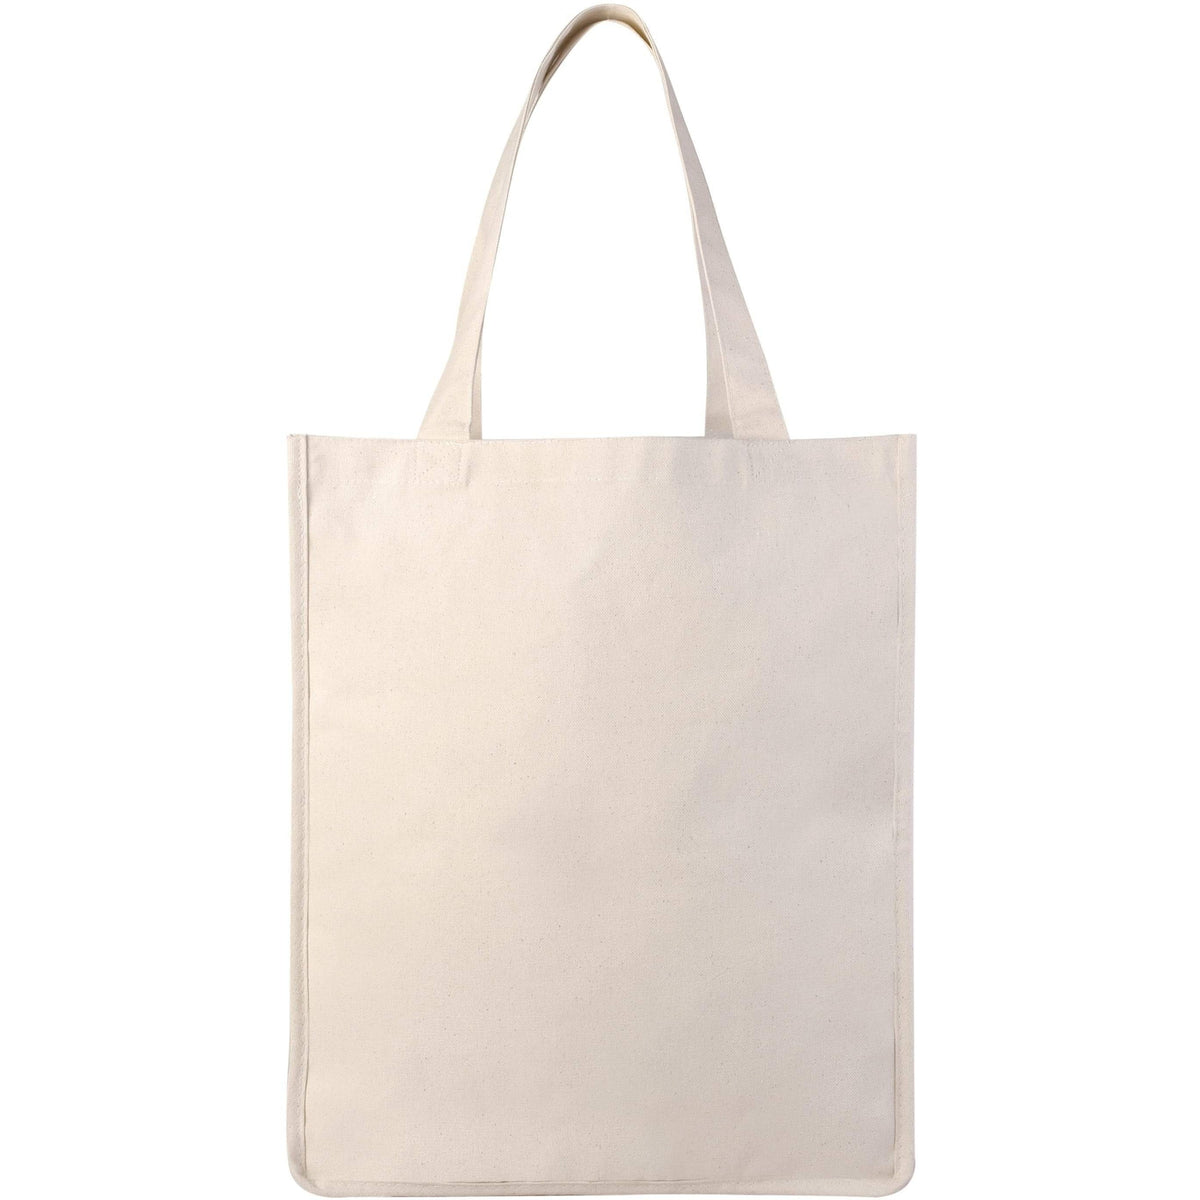 Canvas Shopping Tote Bags, Large Canvas Bags Wholesale - Cheap Totes ...